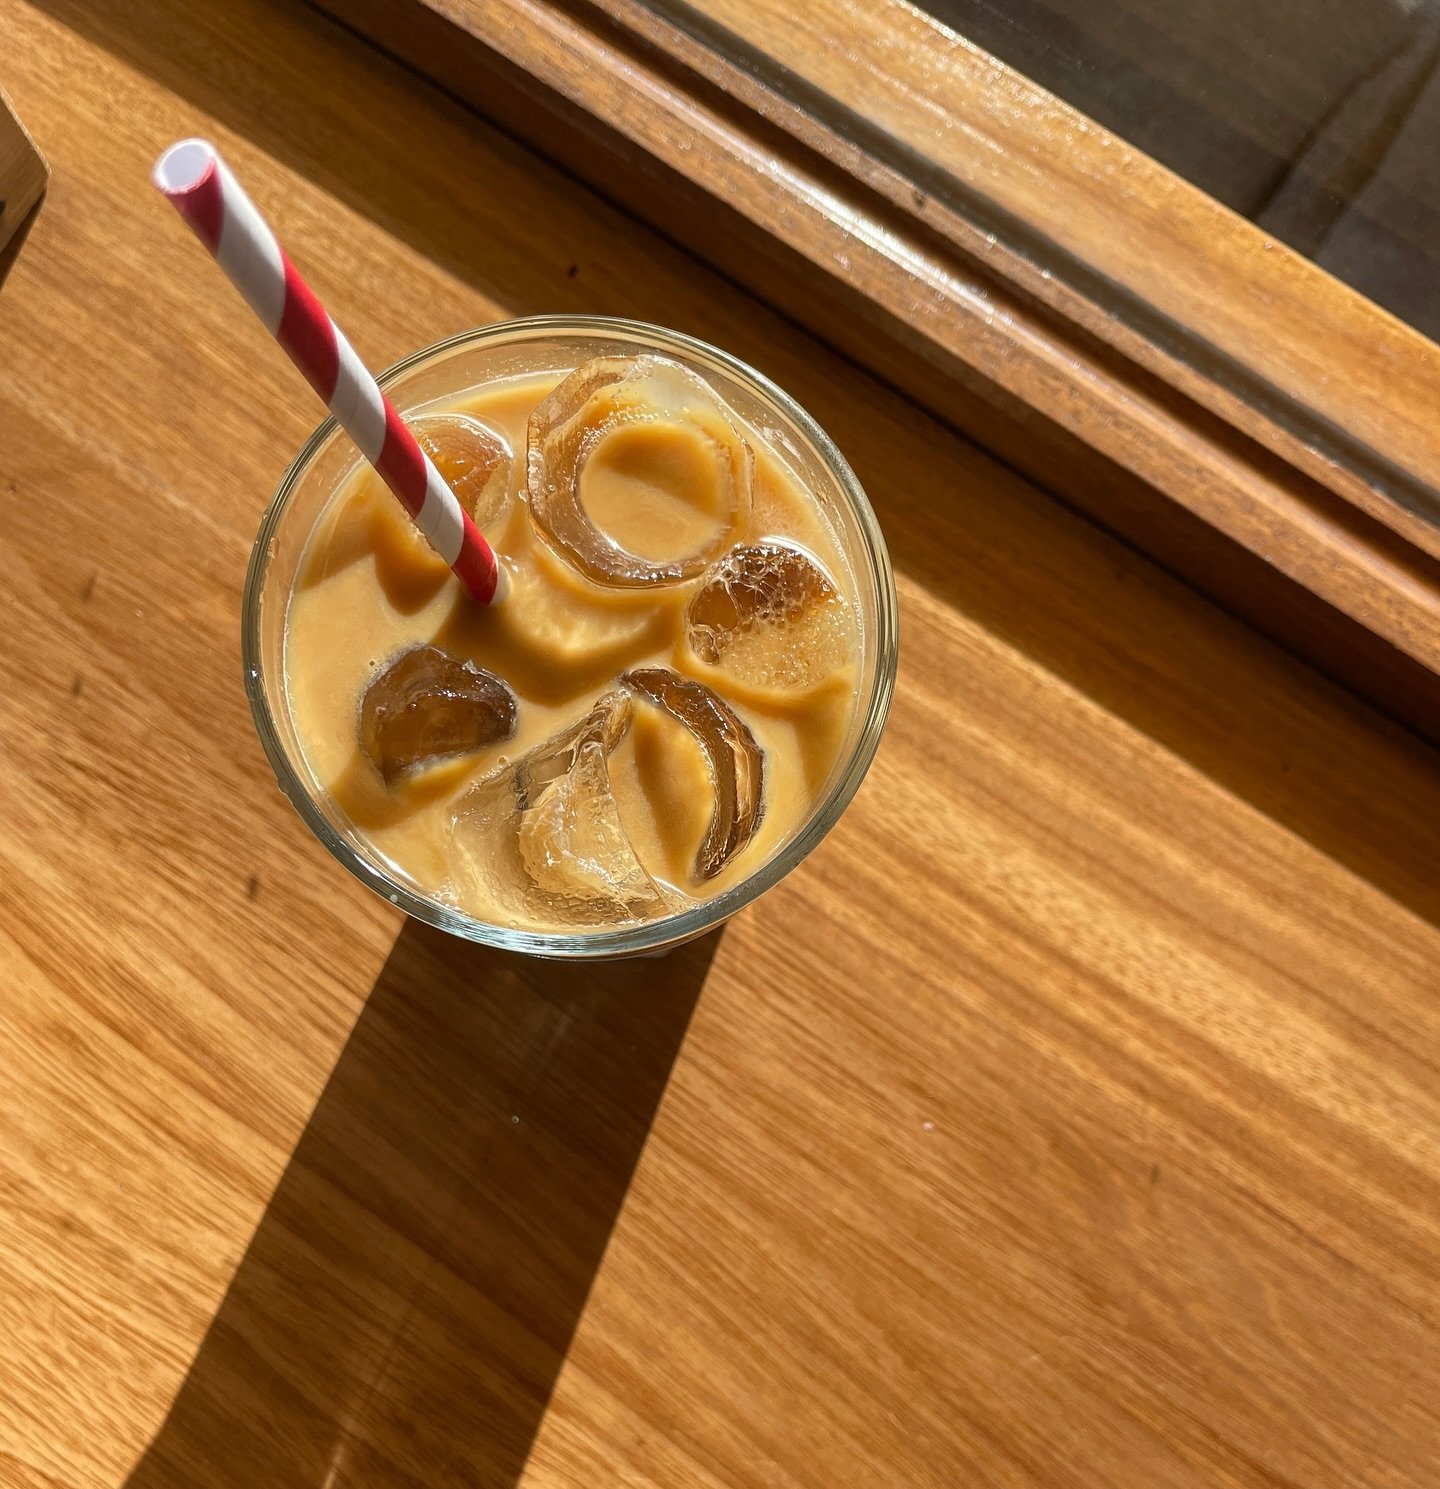 More iced coffee weather please!